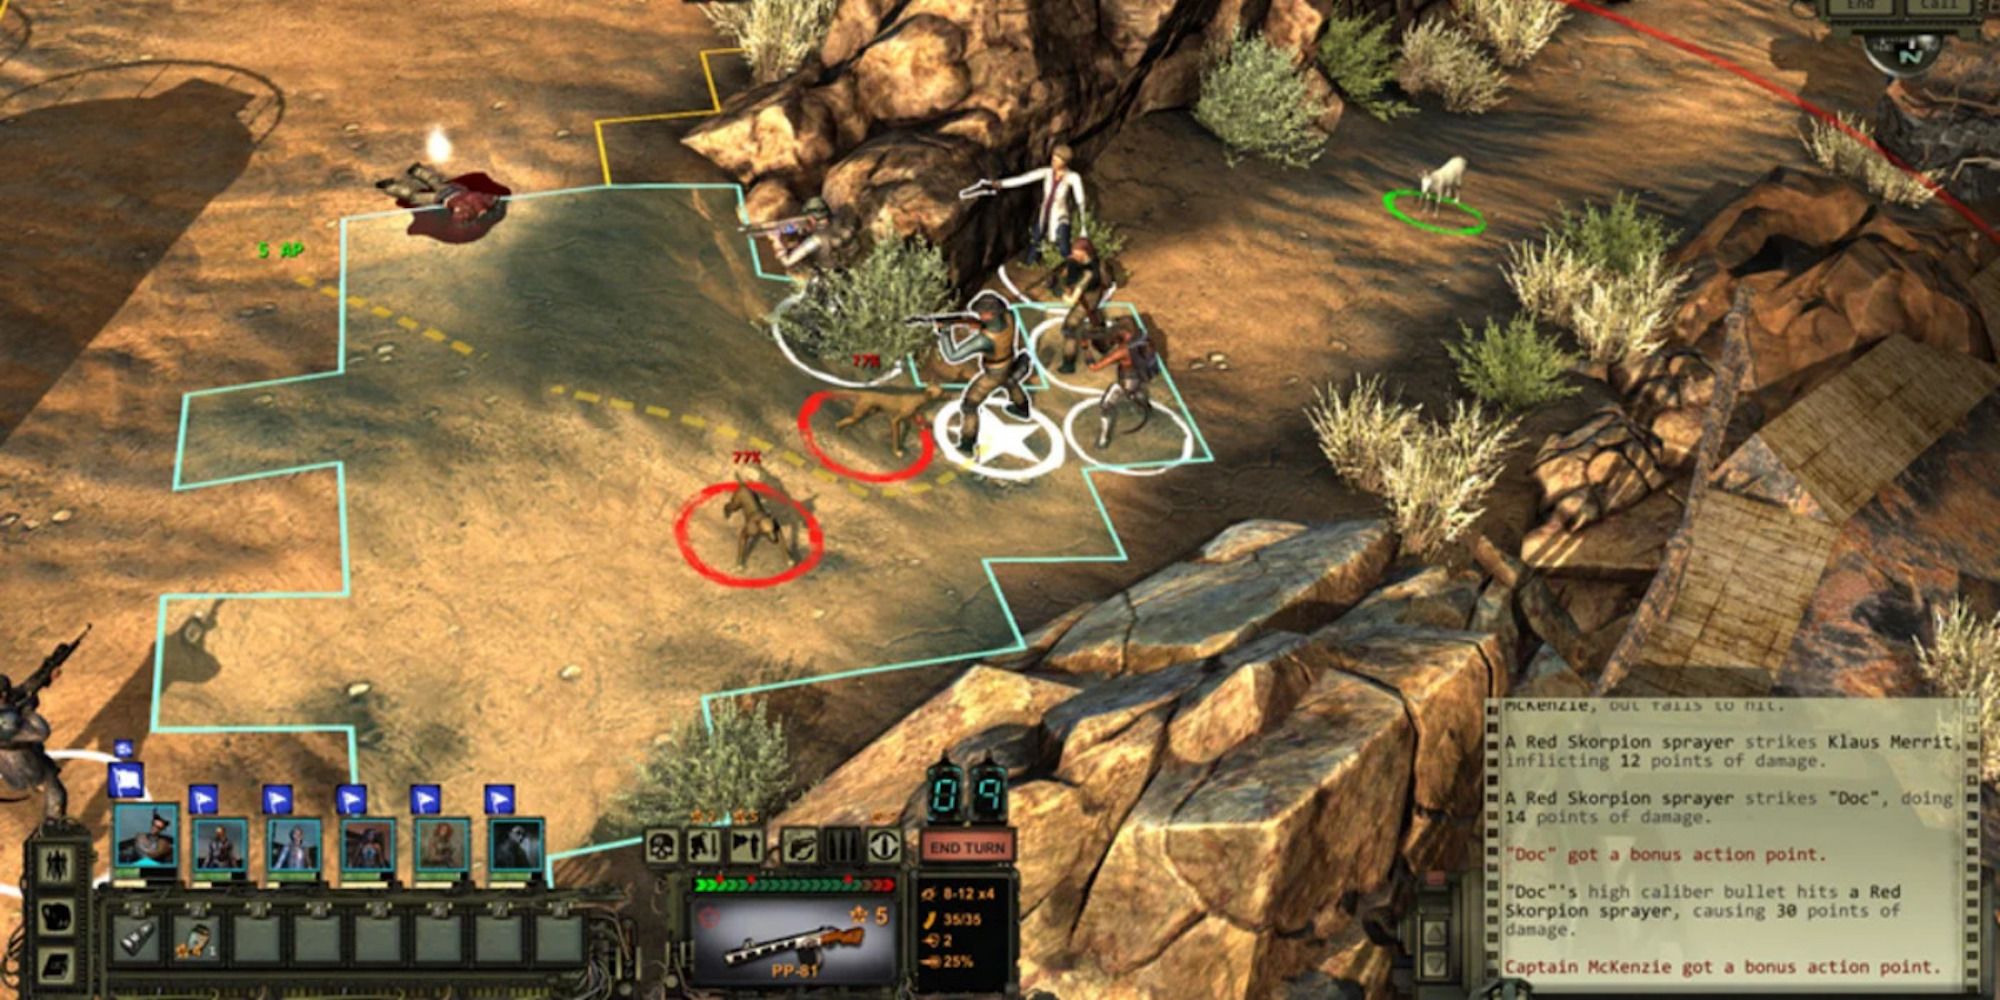 Fighting a battle in Wasteland 2